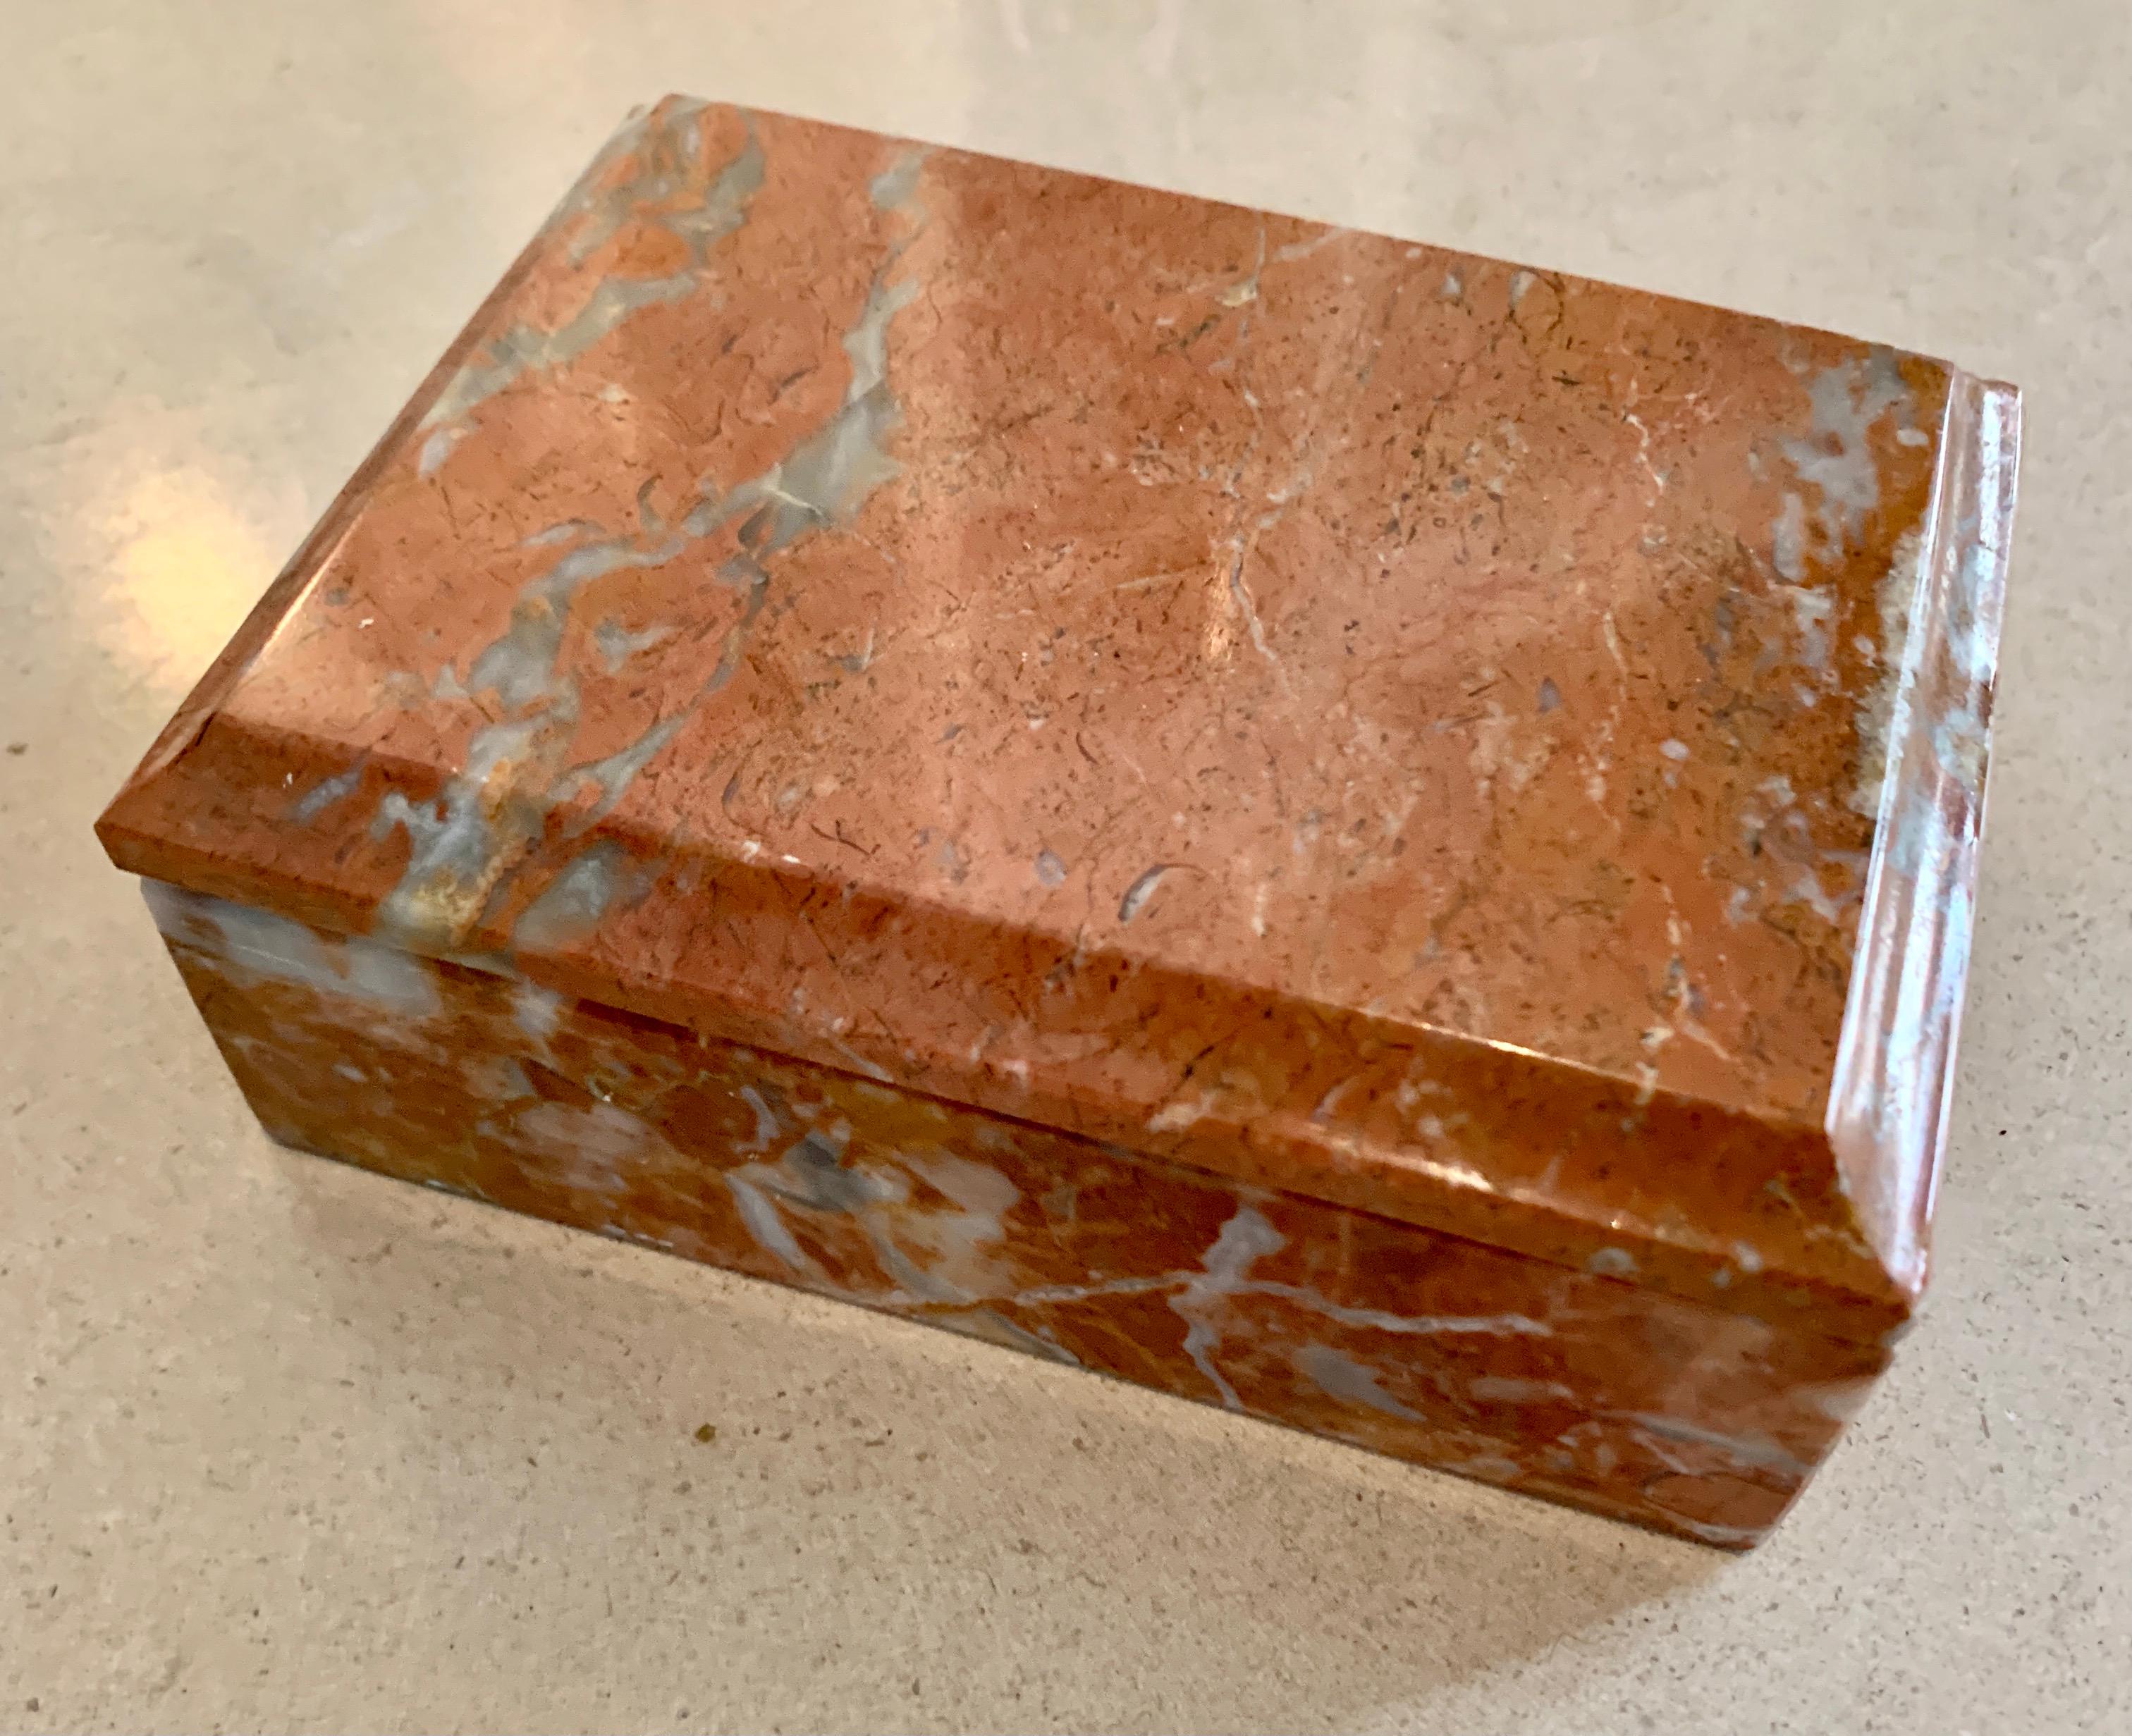 A wonderful Italian Alabaster box with custom lid. The piece is a compliment to any desk, vanity, work station, or cocktail table. The box is a wonderful decorative piece holding everything from trinkets, to paper clips to 420. A nice birthday gift,